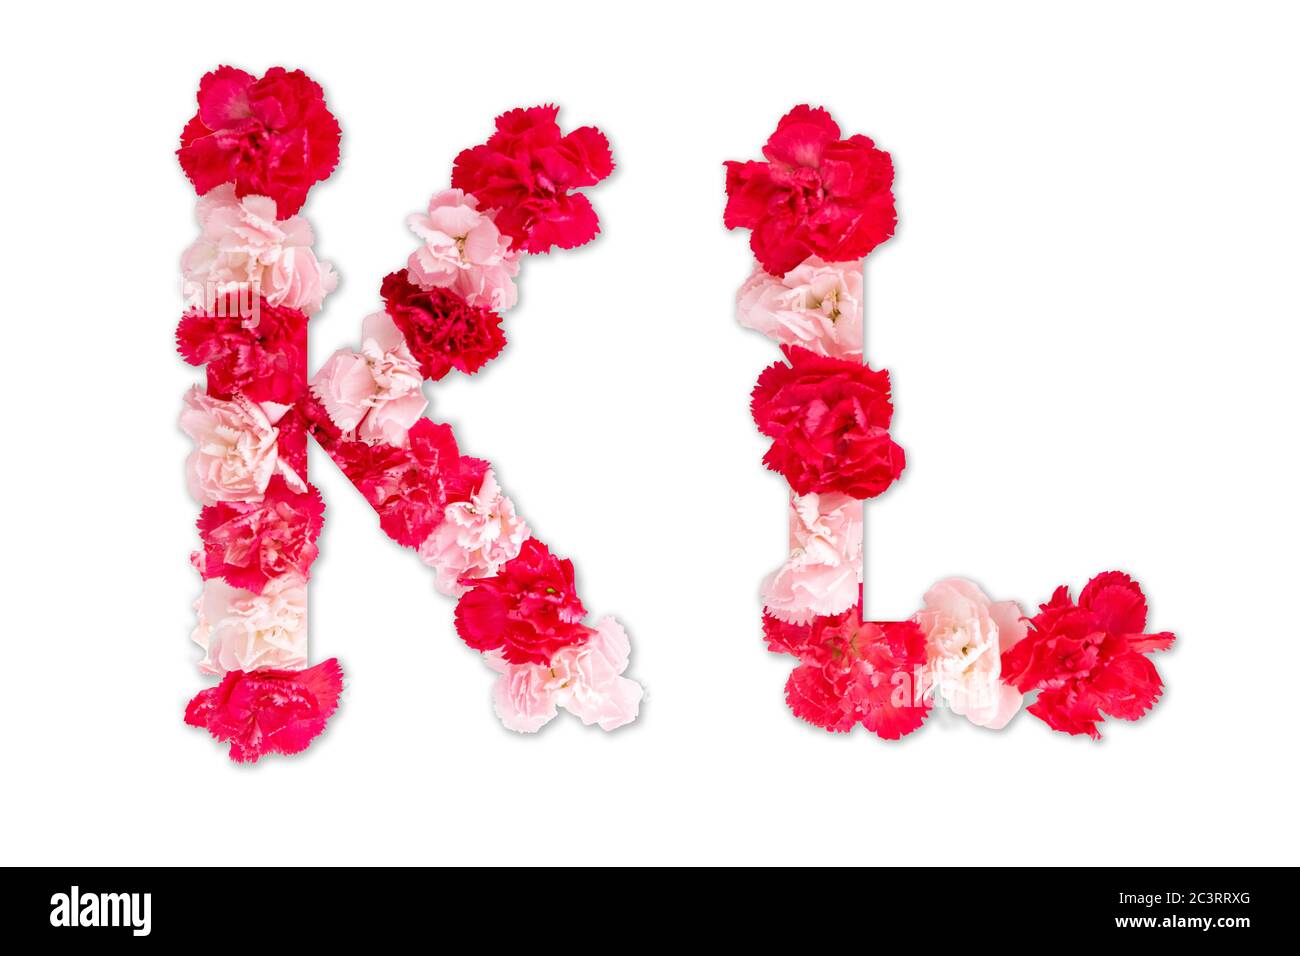 Flower Font Alphabet K L Set Collection A Z Made From Real Carnation Flowers Pink Red Color With Paper Cut Shape Of Capital Letter Flora Font Stock Photo Alamy